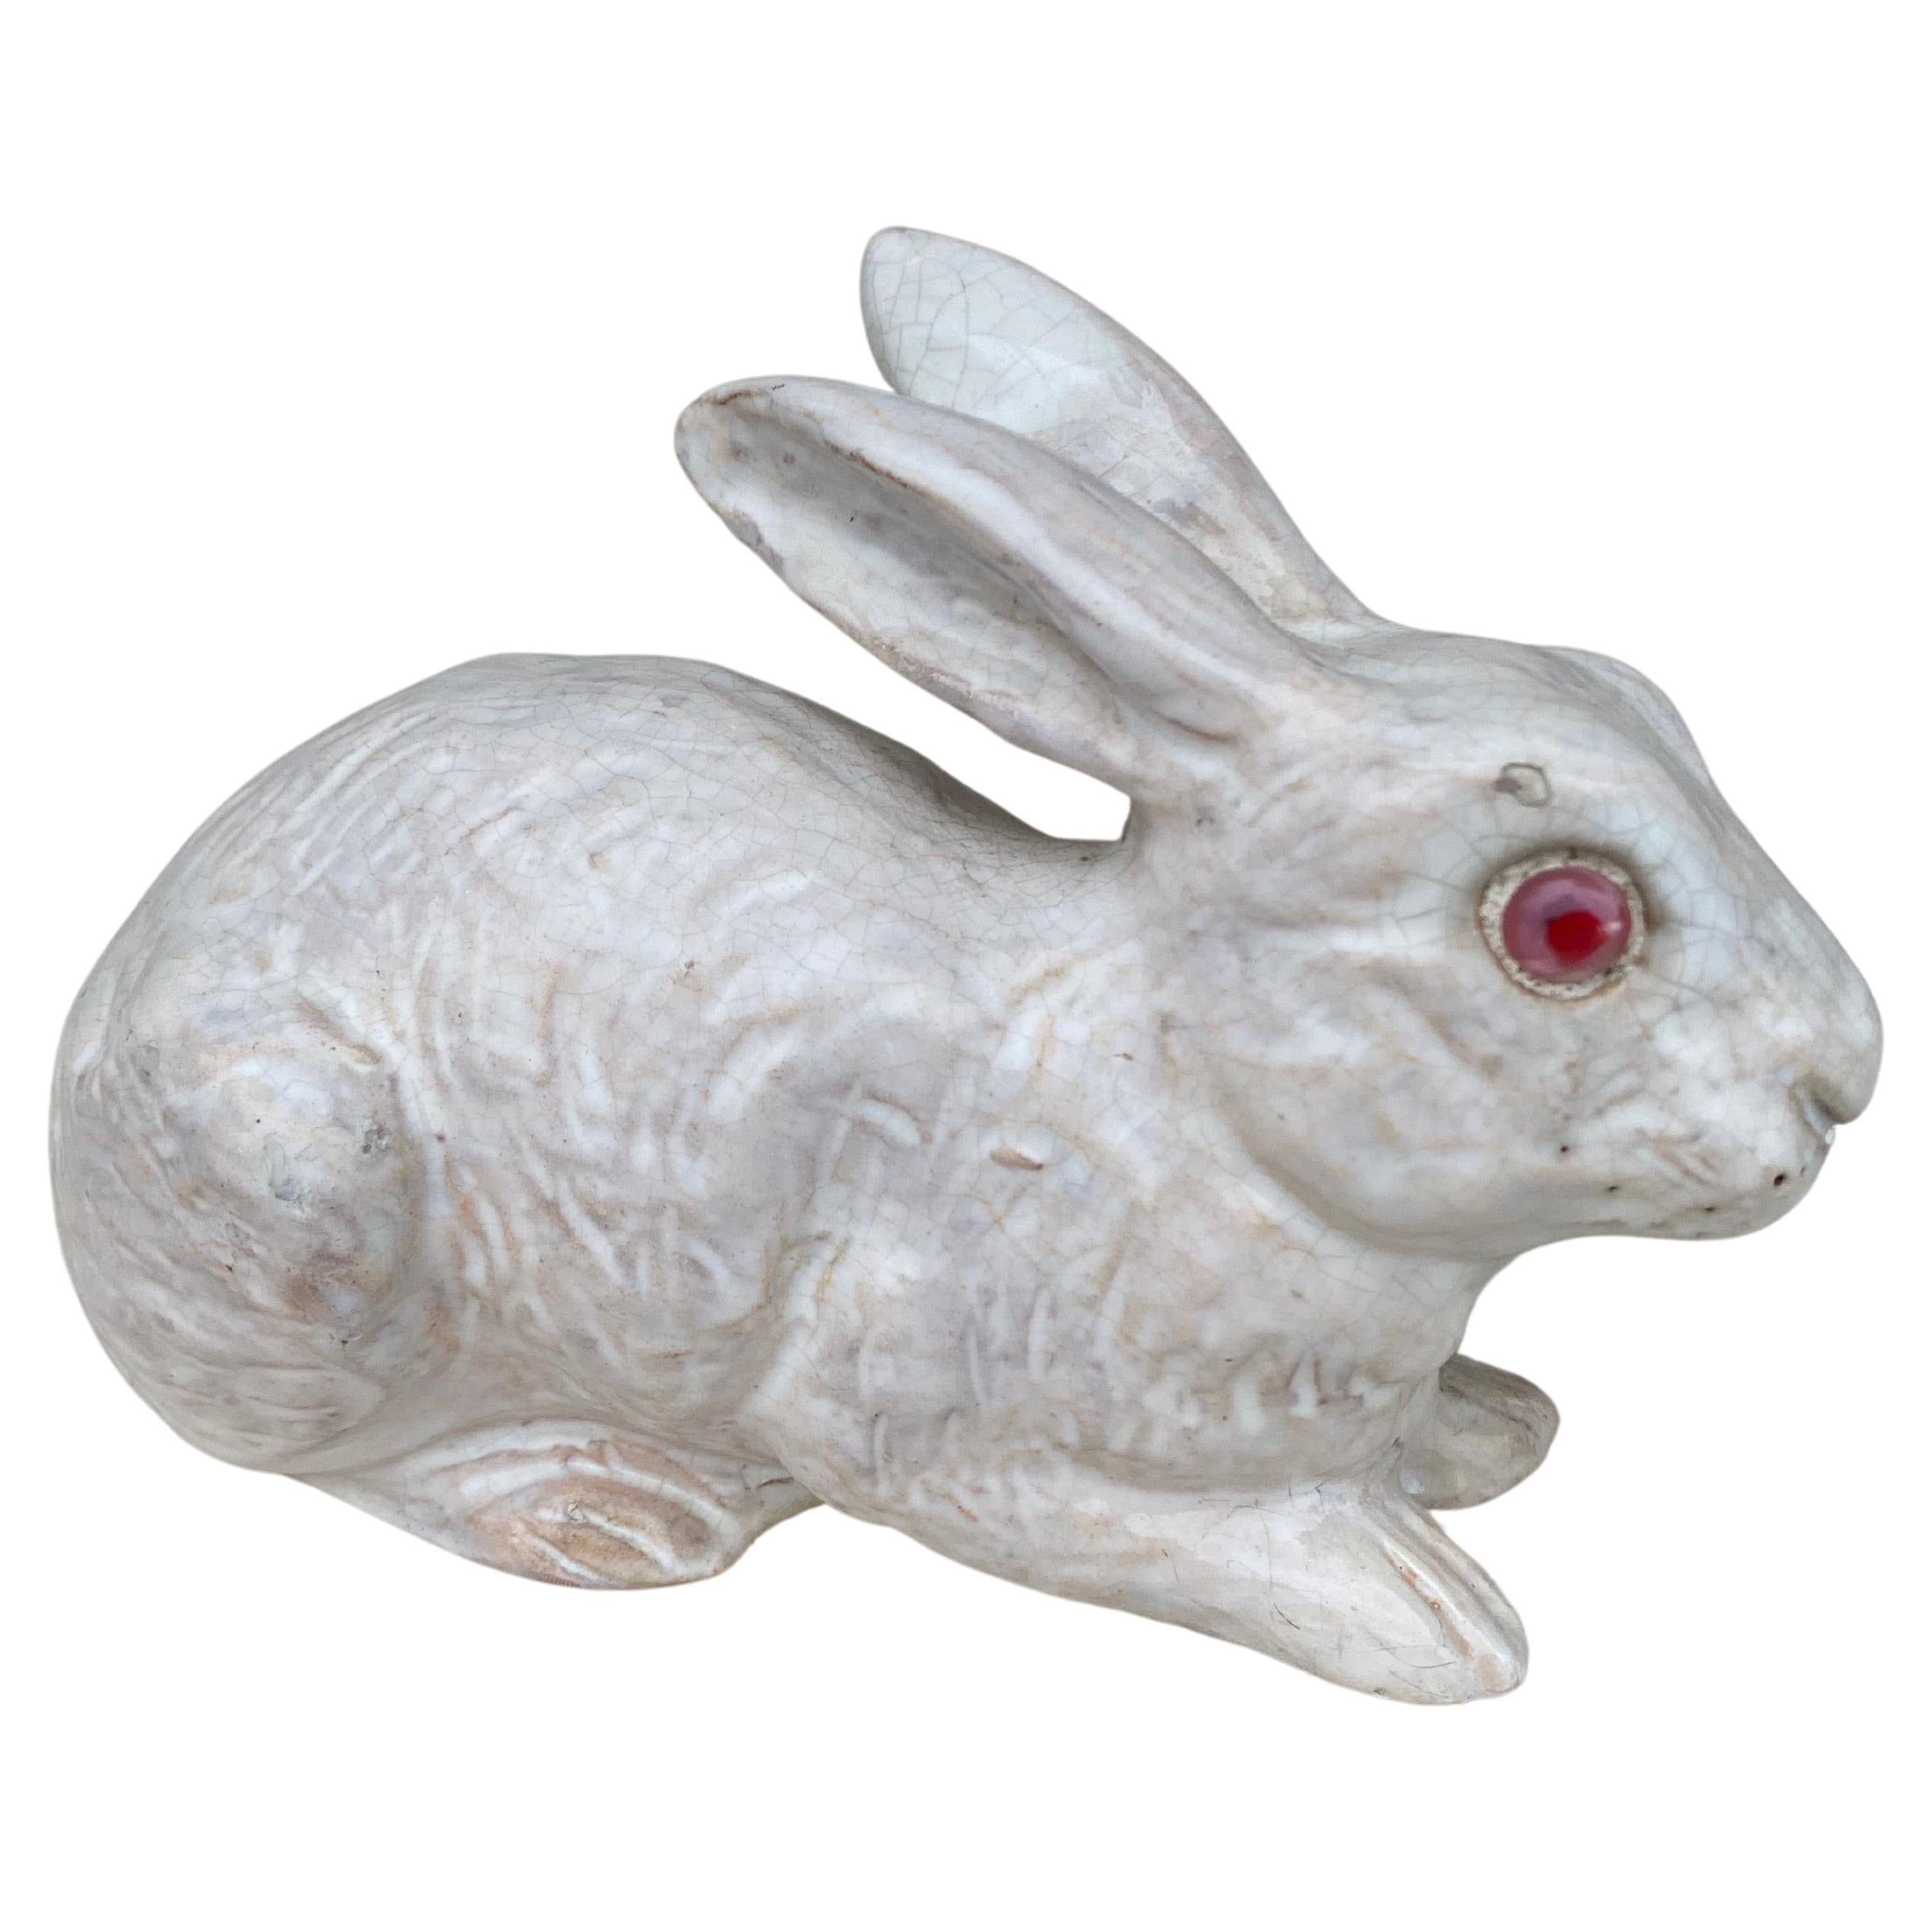 French white terracotta rabbit signed Bavent, circa 1890.
(Normandy).
Size / Length: 9 inches on 4.5 inches, height / 4.8 inches.